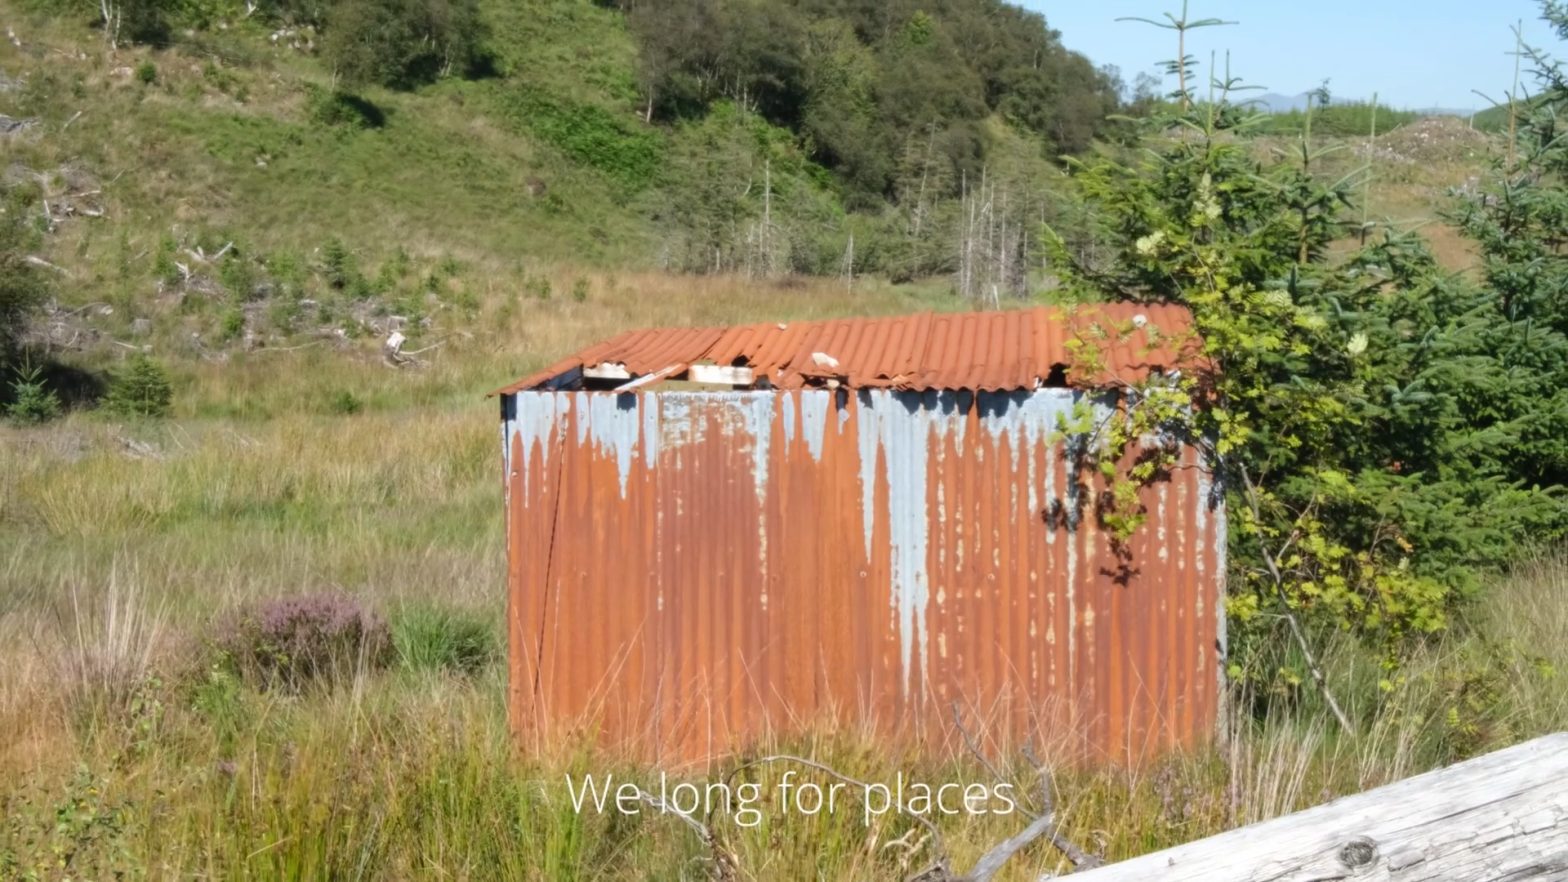 Corrugated metal hut which has gone rusty in a hilly landscape with trees and grass, with the words: We long for places